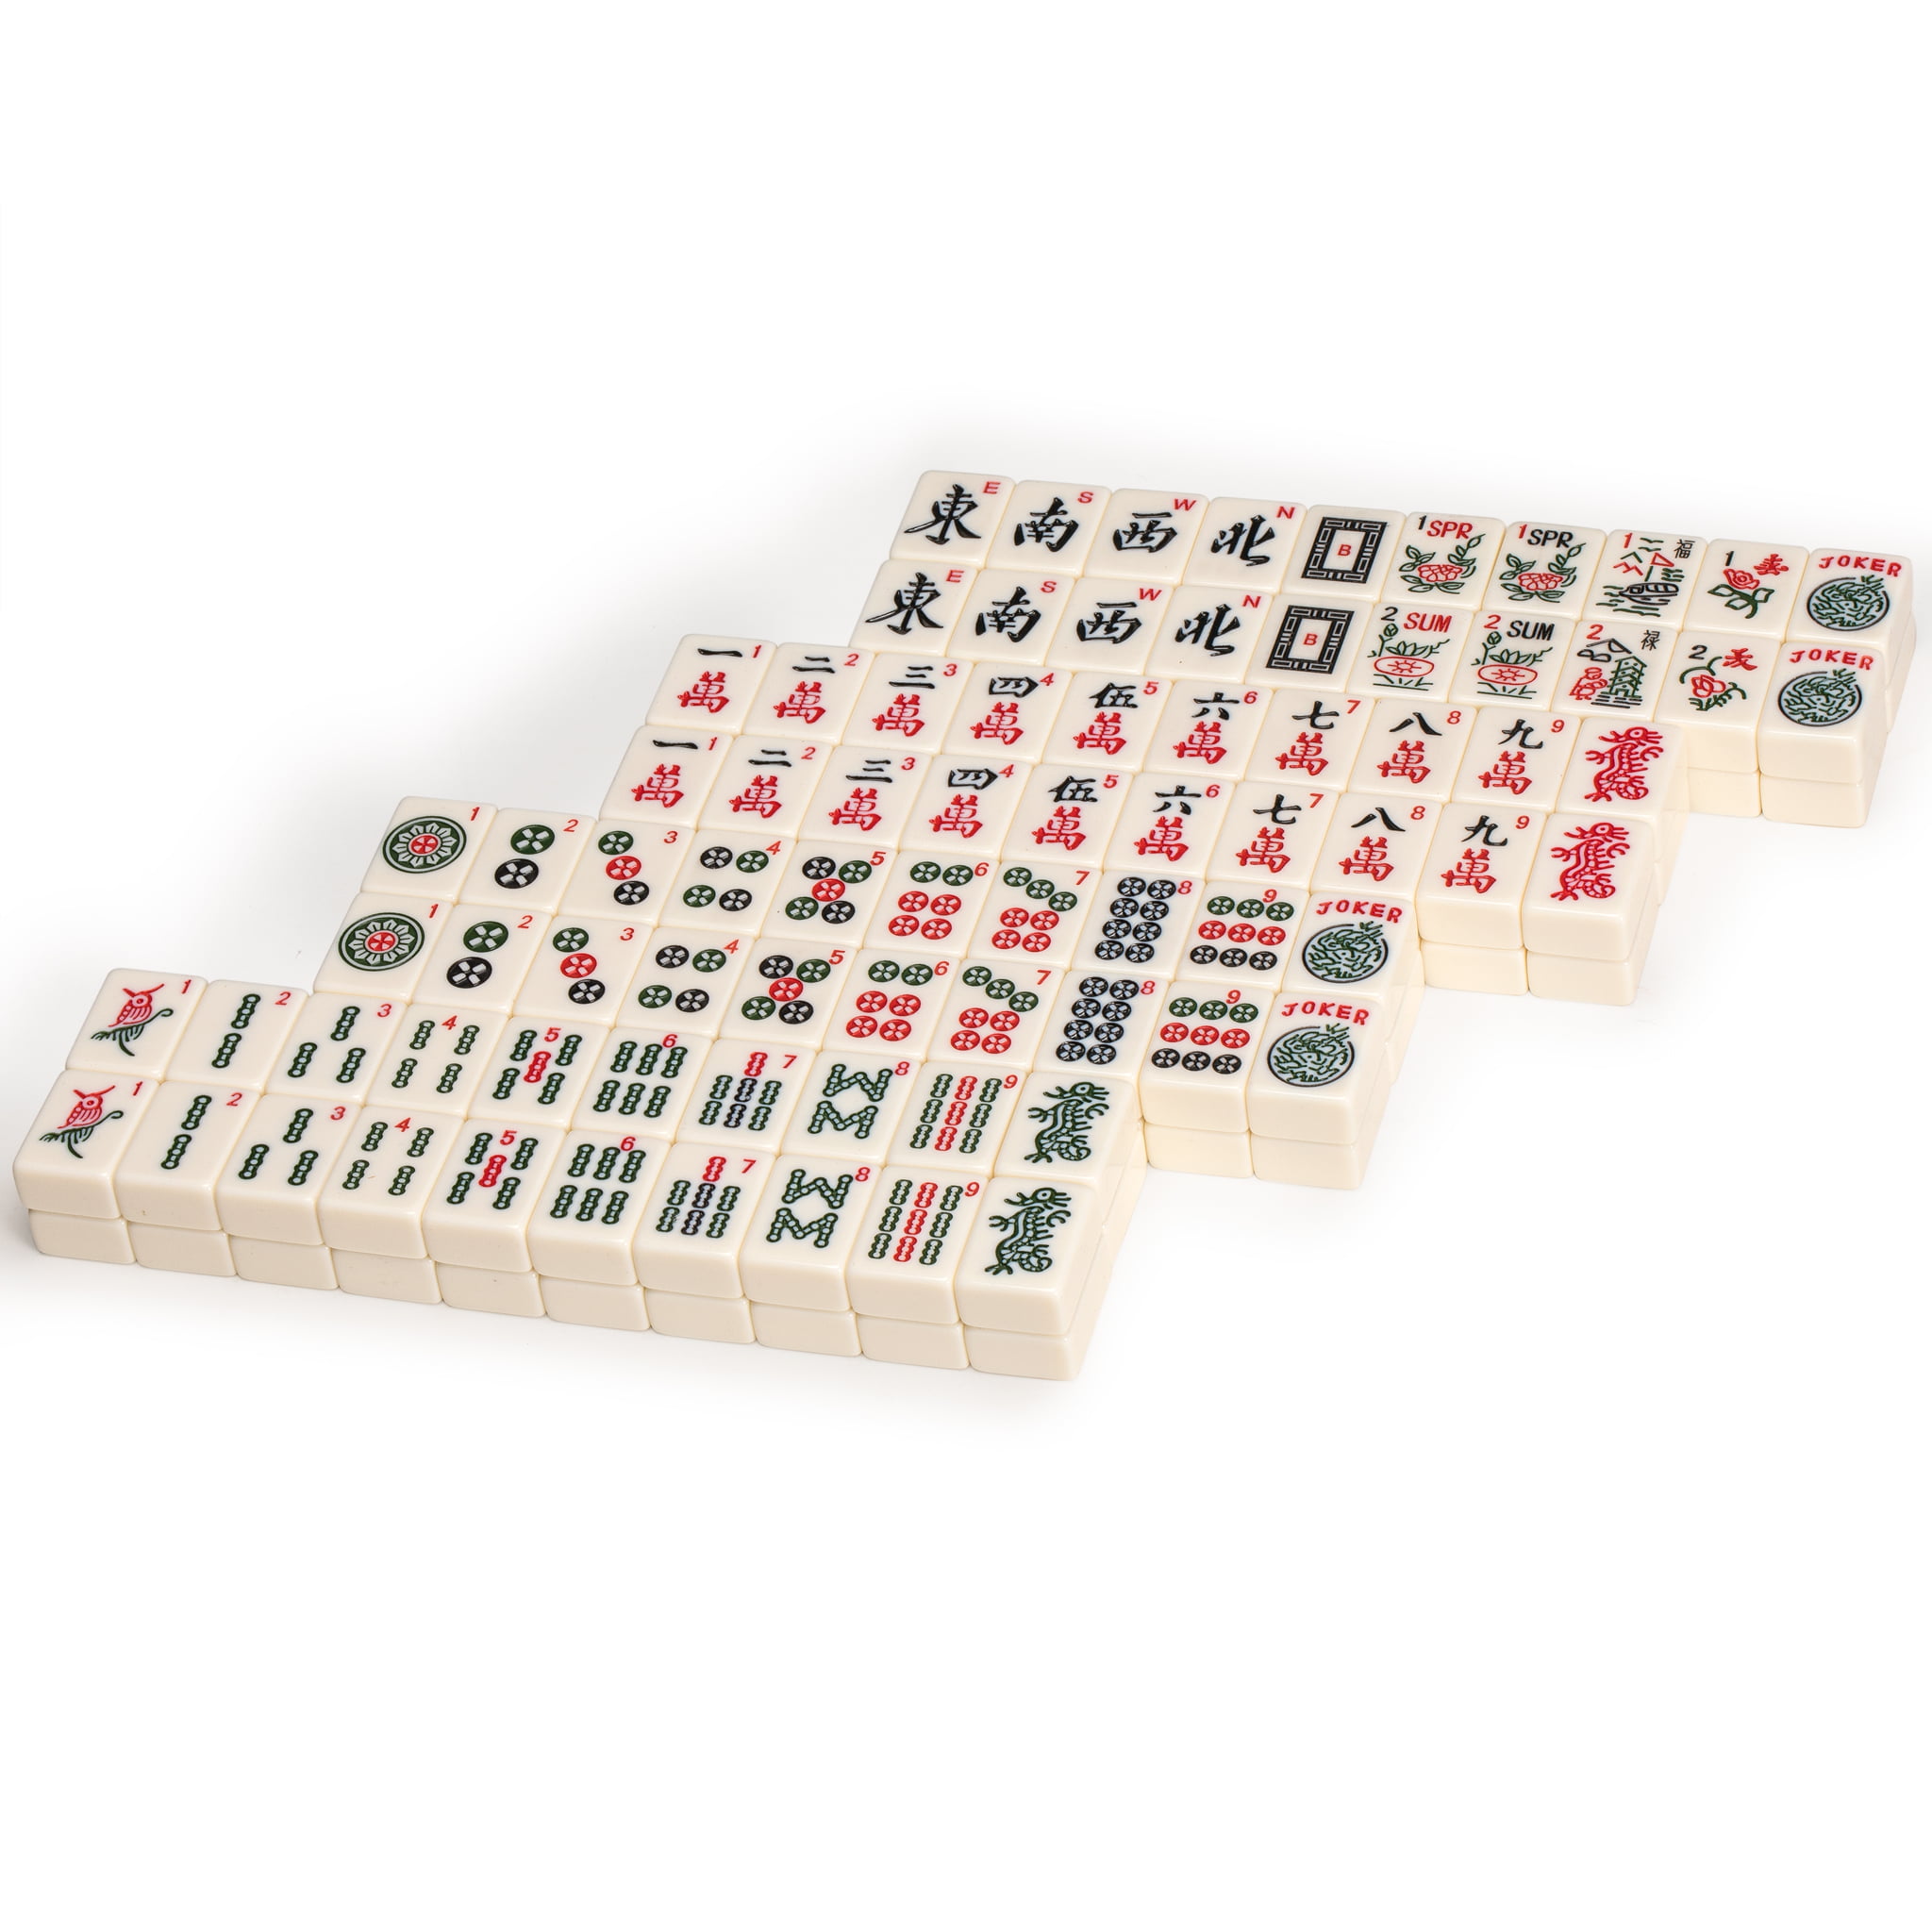 Set of 166 American Mahjong Tiles, The Classic (Tiles Only Set) 